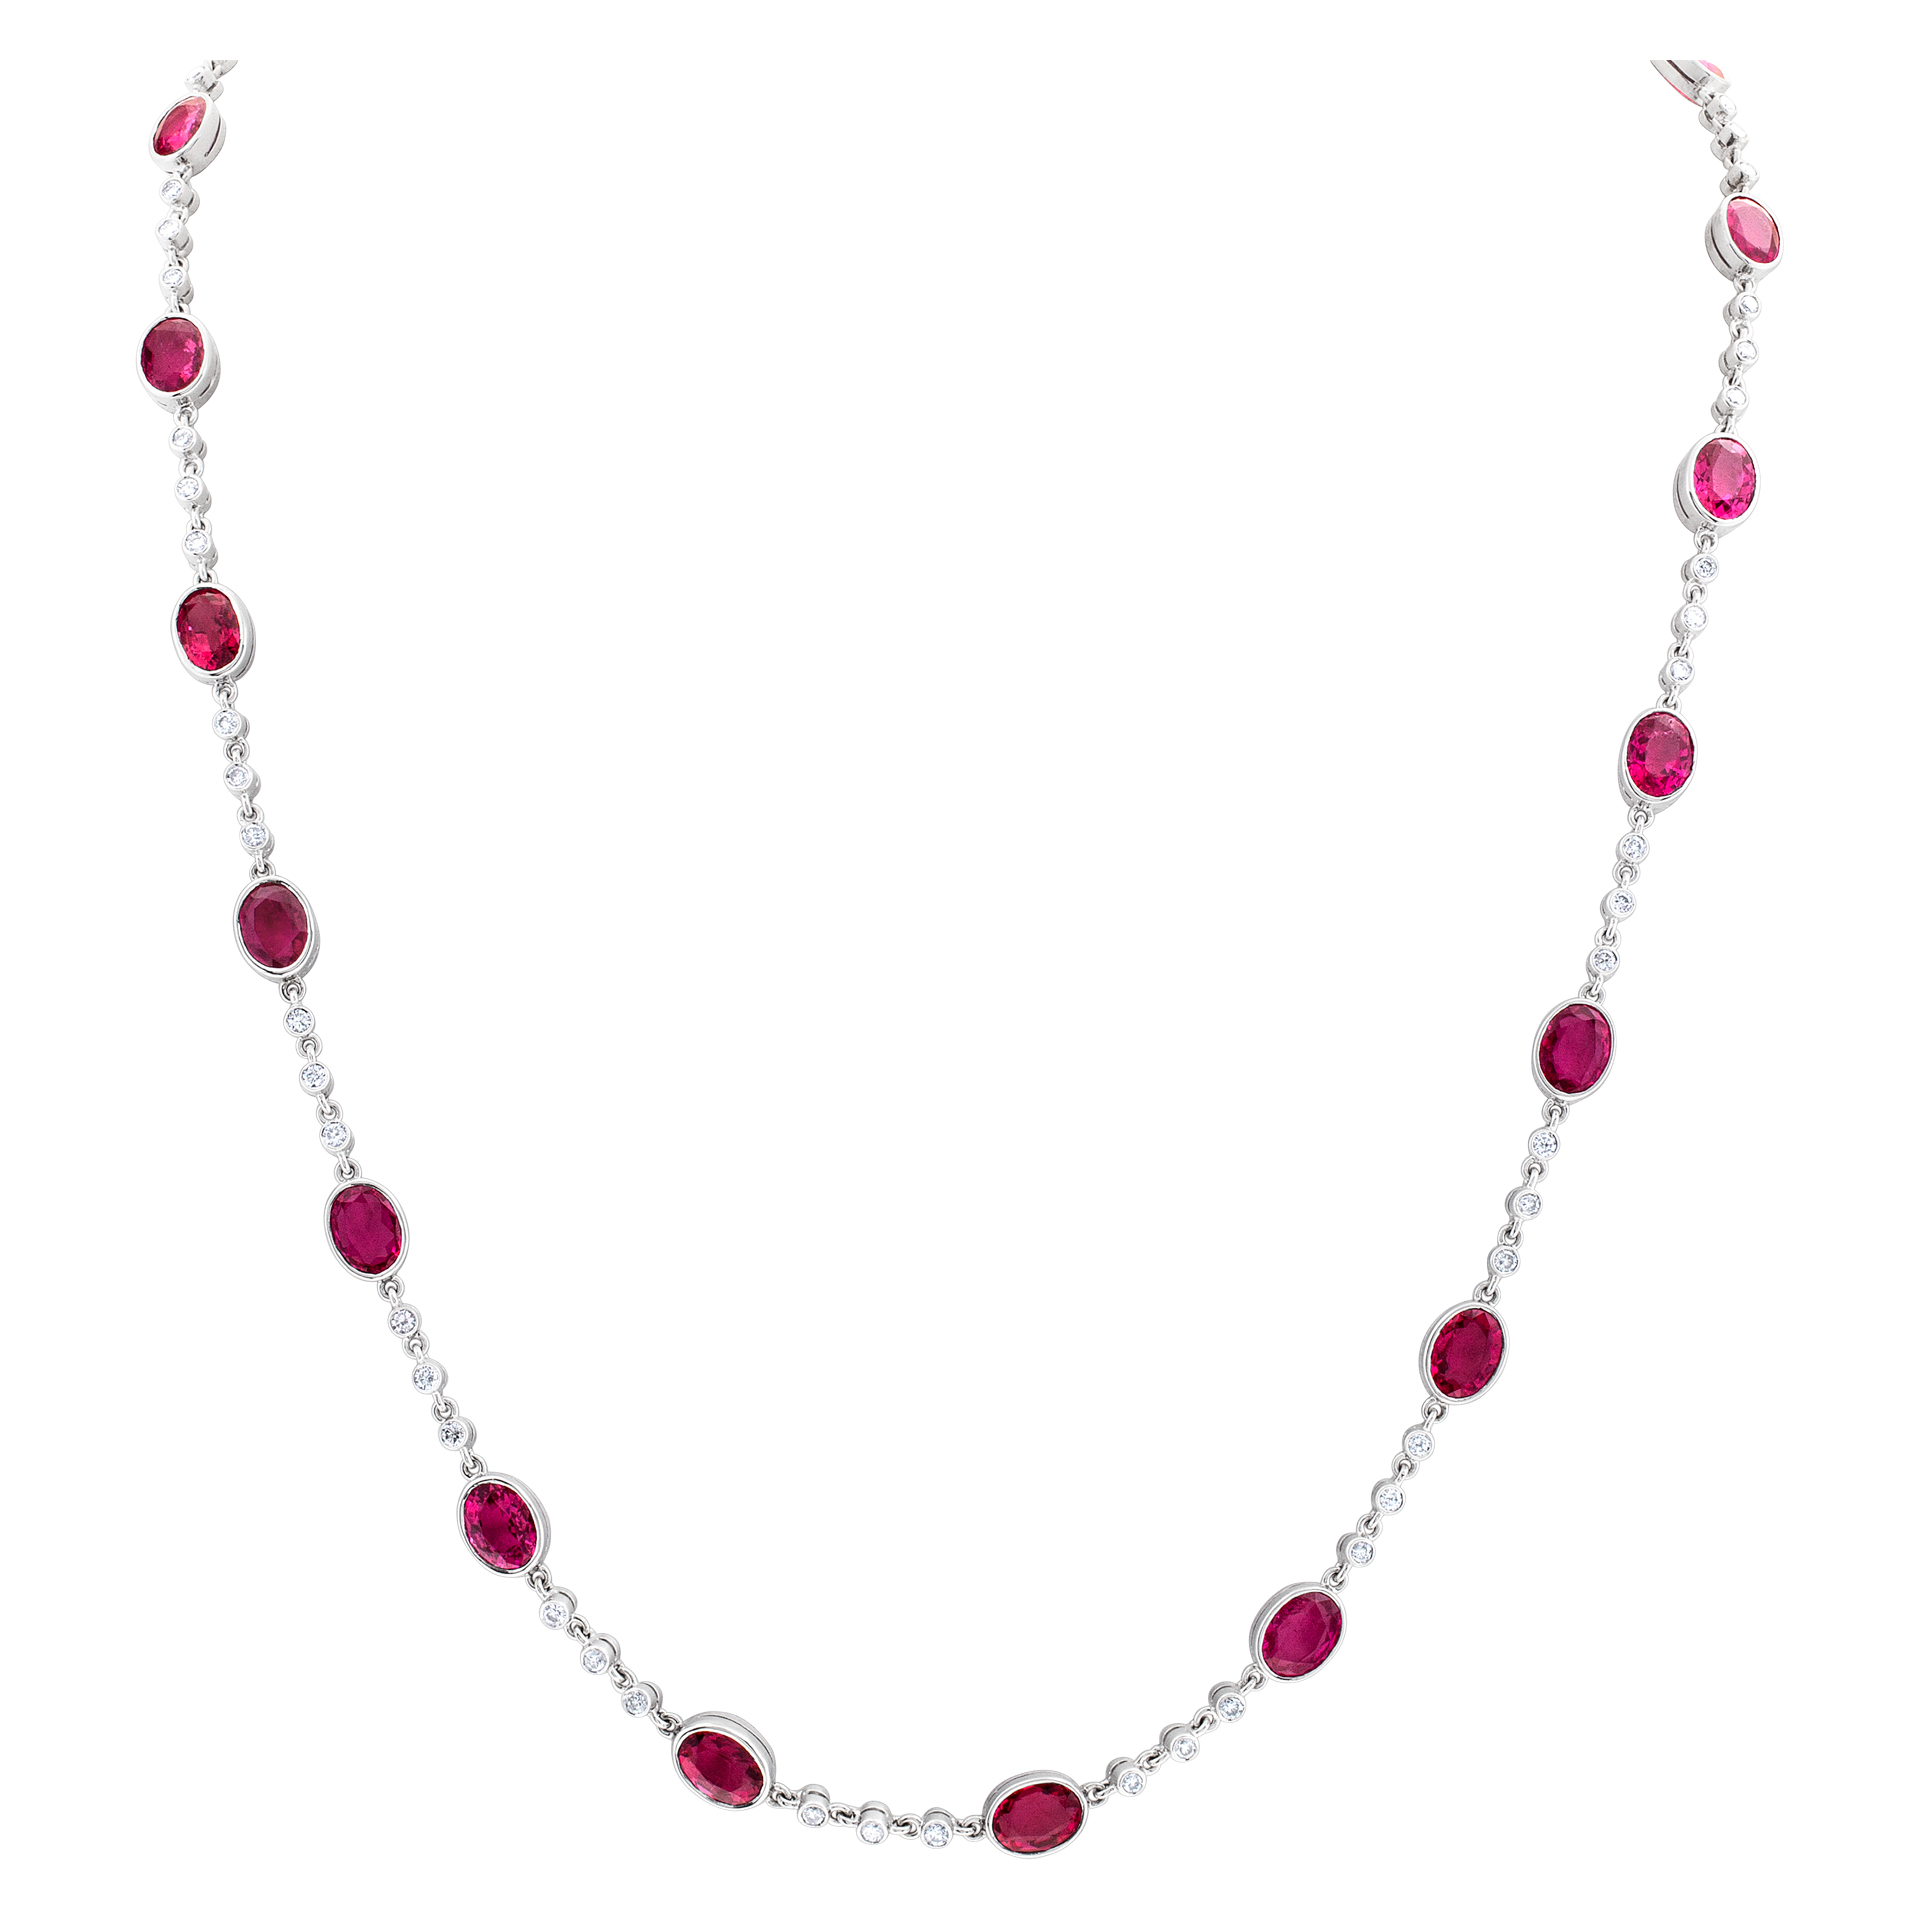 Rubelite necklace in 18k white gold with 2.79 cts in diamonds and 33.81 cts in rubelite